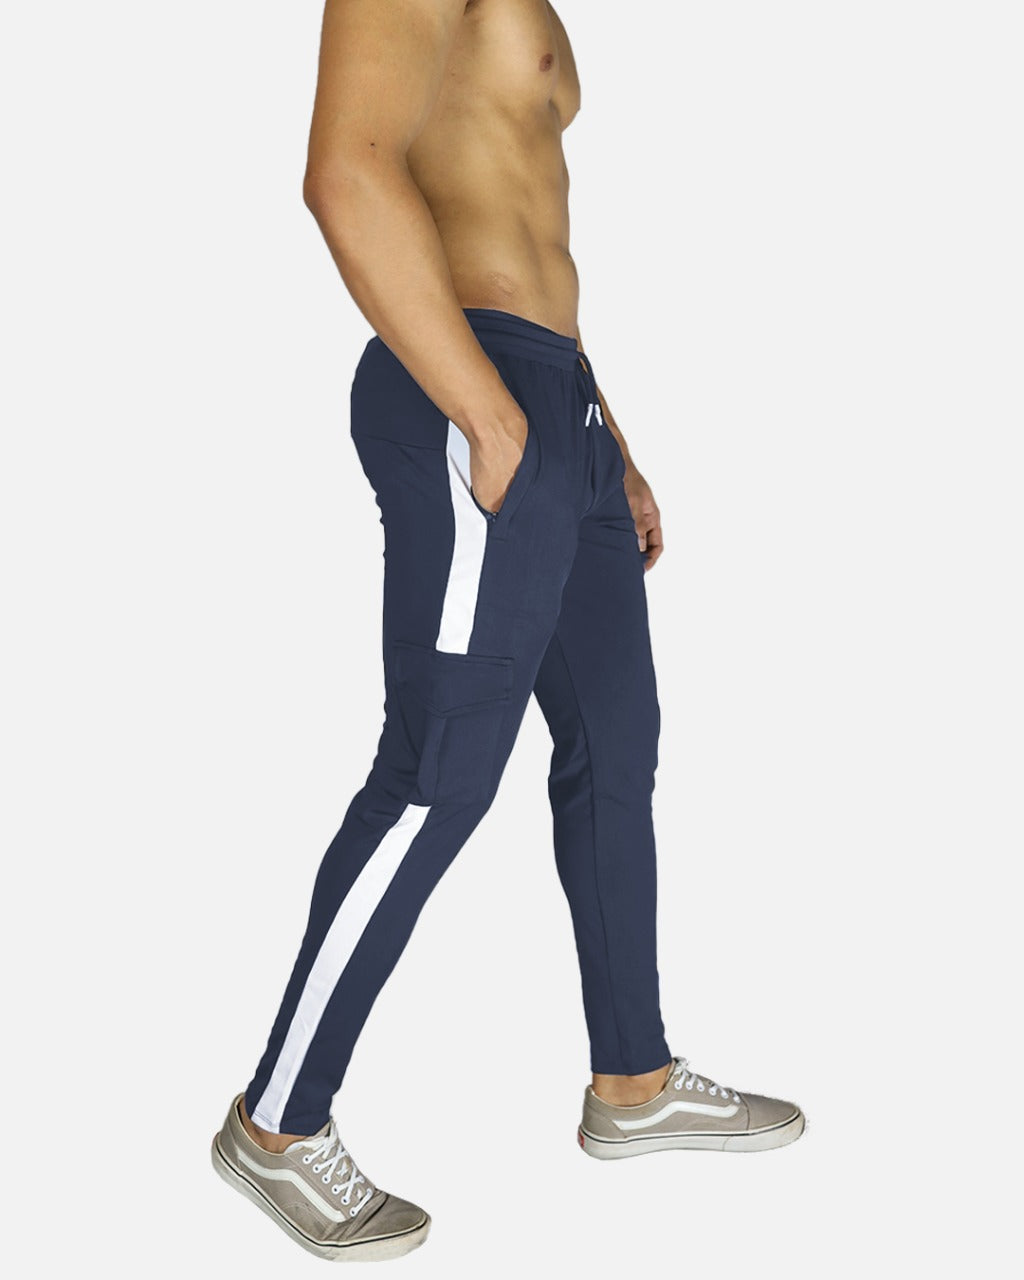 Buy Gym Track Pants Online In India At Best Price Offers | Tata CLiQ